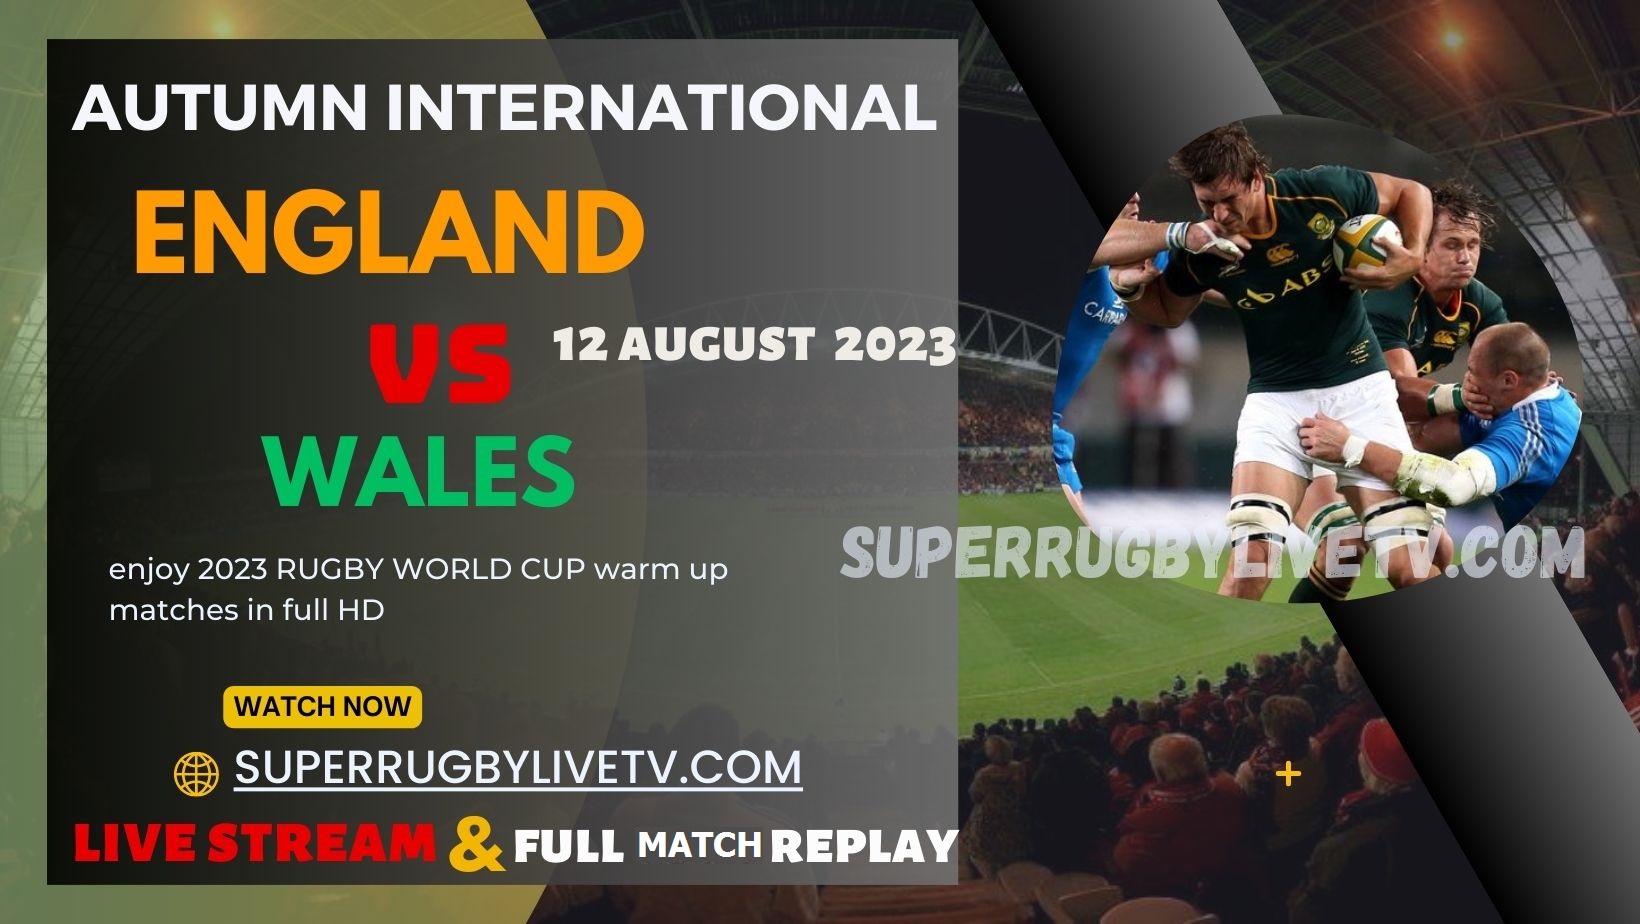 wales-vs-england-autumn-internationals-rugby-live-stream